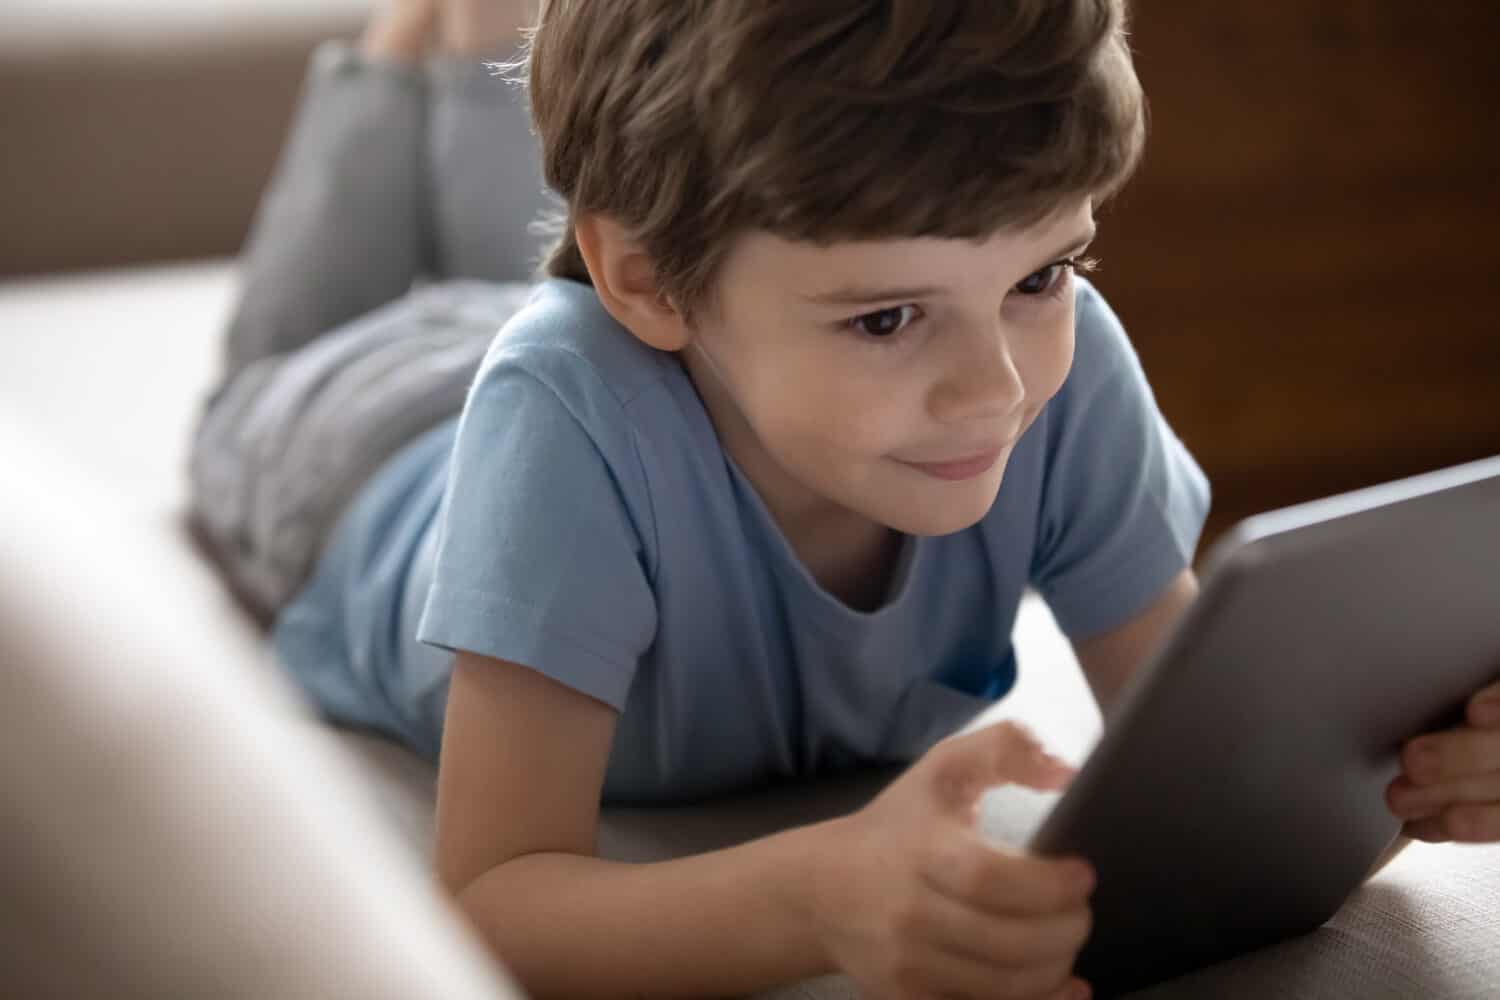 manage kids screen time